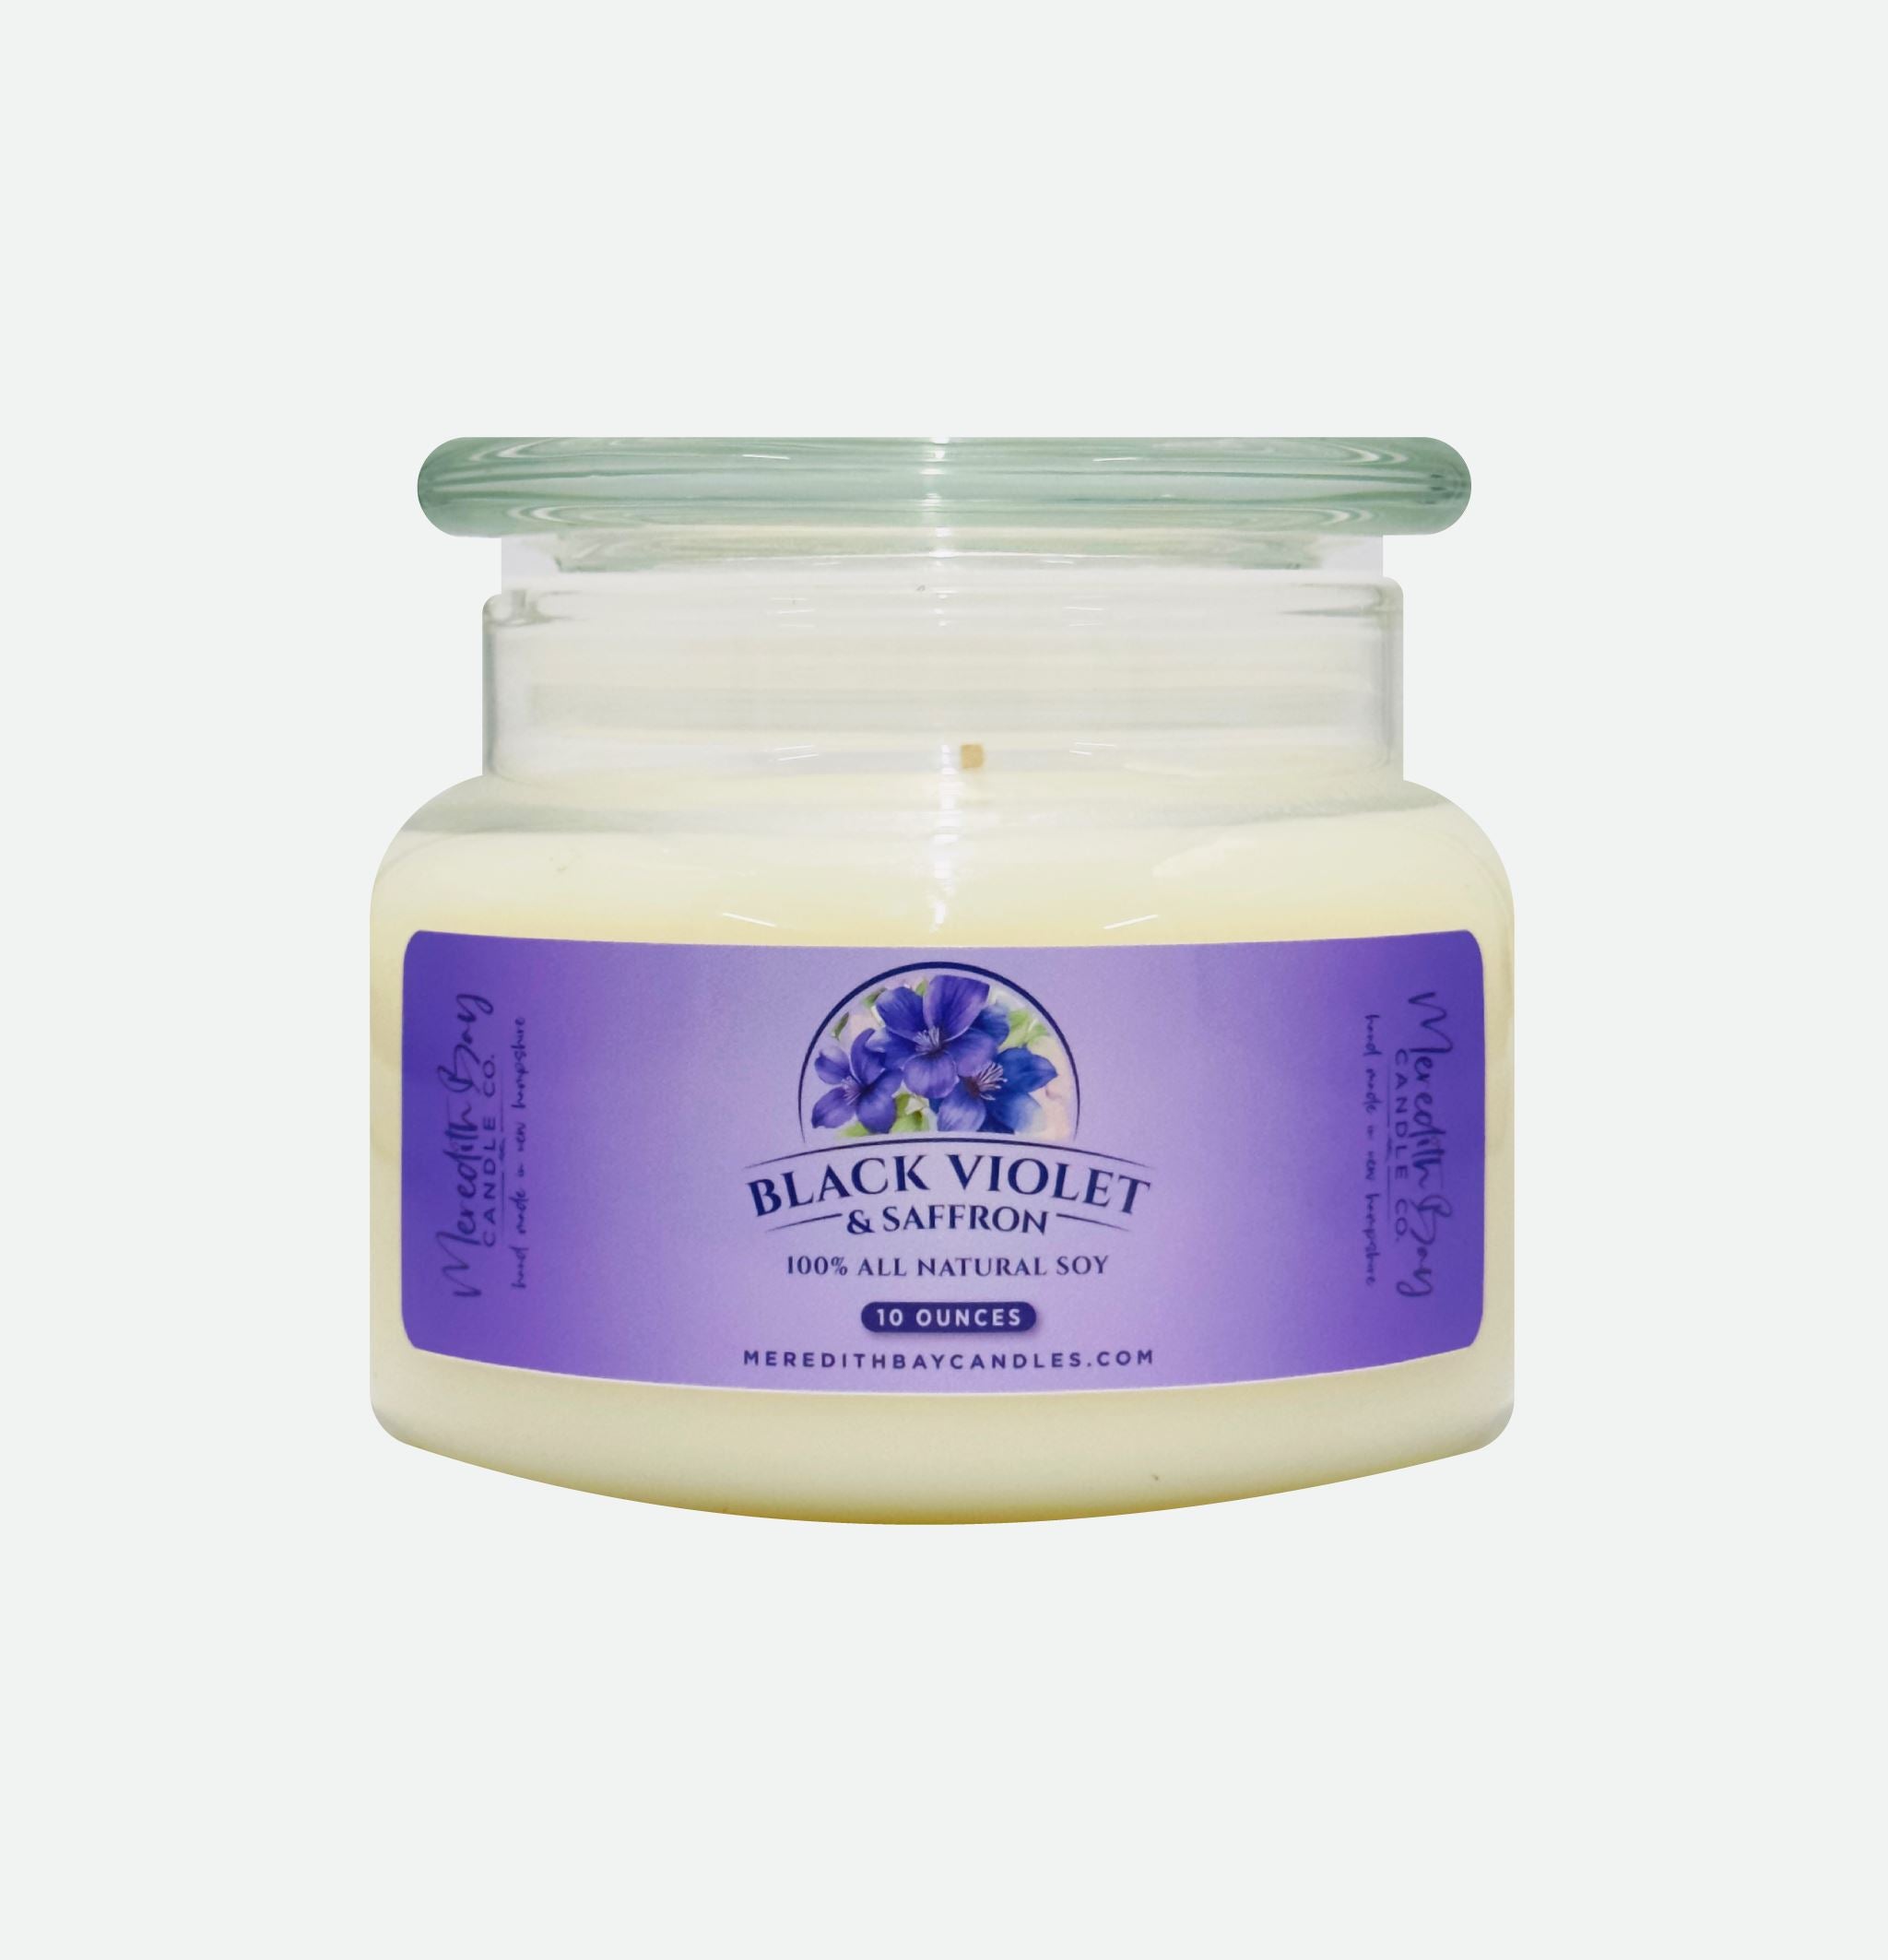 Black Violet & Saffron Soy Candle Soy Candle Meredith Bay Candle Co 10.0 Oz 